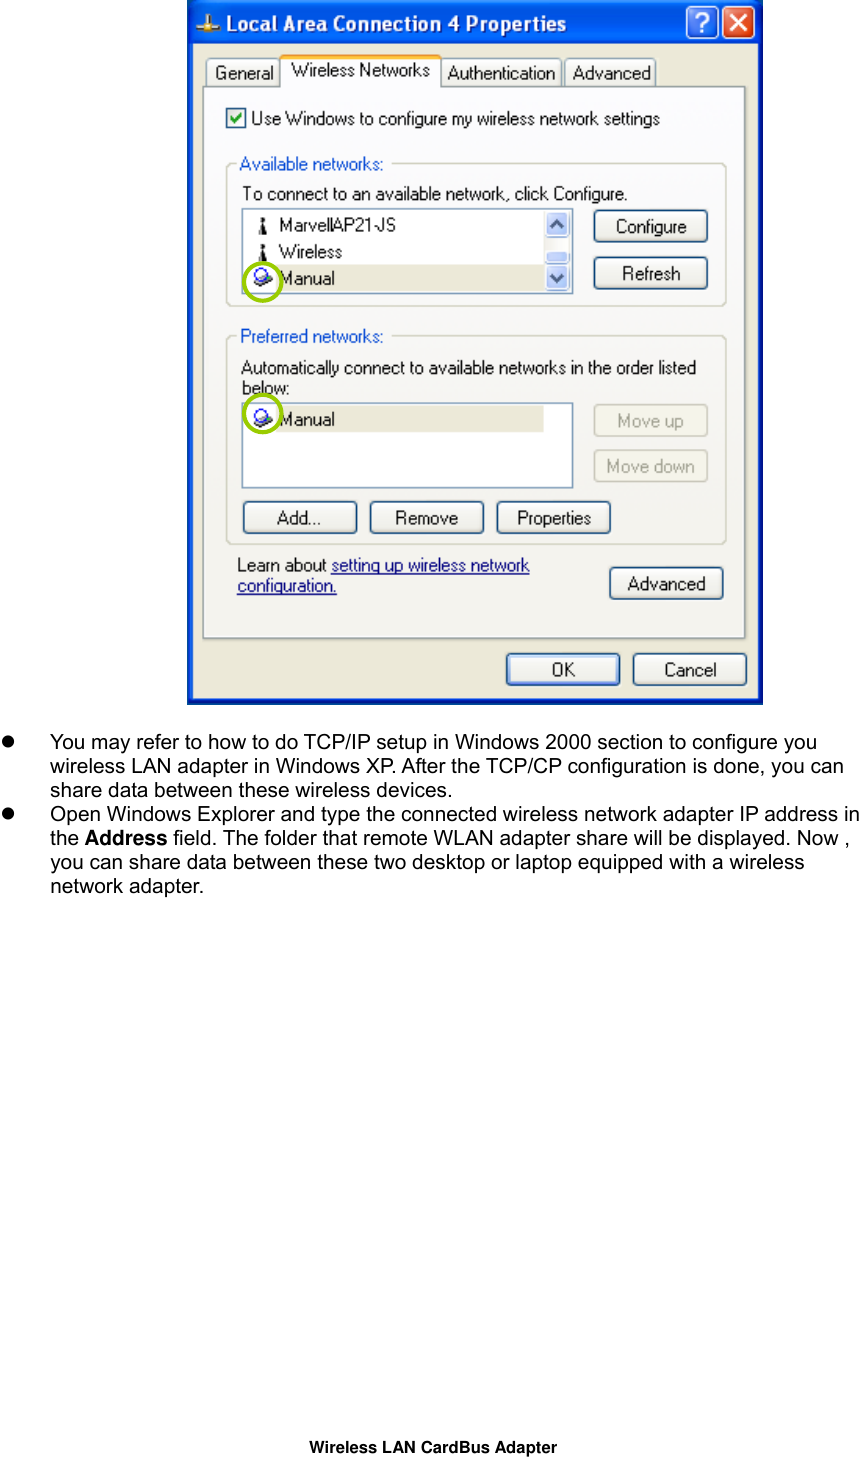    You may refer to how to do TCP/IP setup in Windows 2000 section to configure you wireless LAN adapter in Windows XP. After the TCP/CP configuration is done, you can share data between these wireless devices.   Open Windows Explorer and type the connected wireless network adapter IP address in the Address field. The folder that remote WLAN adapter share will be displayed. Now , you can share data between these two desktop or laptop equipped with a wireless network adapter.   Wireless LAN CardBus Adapter 